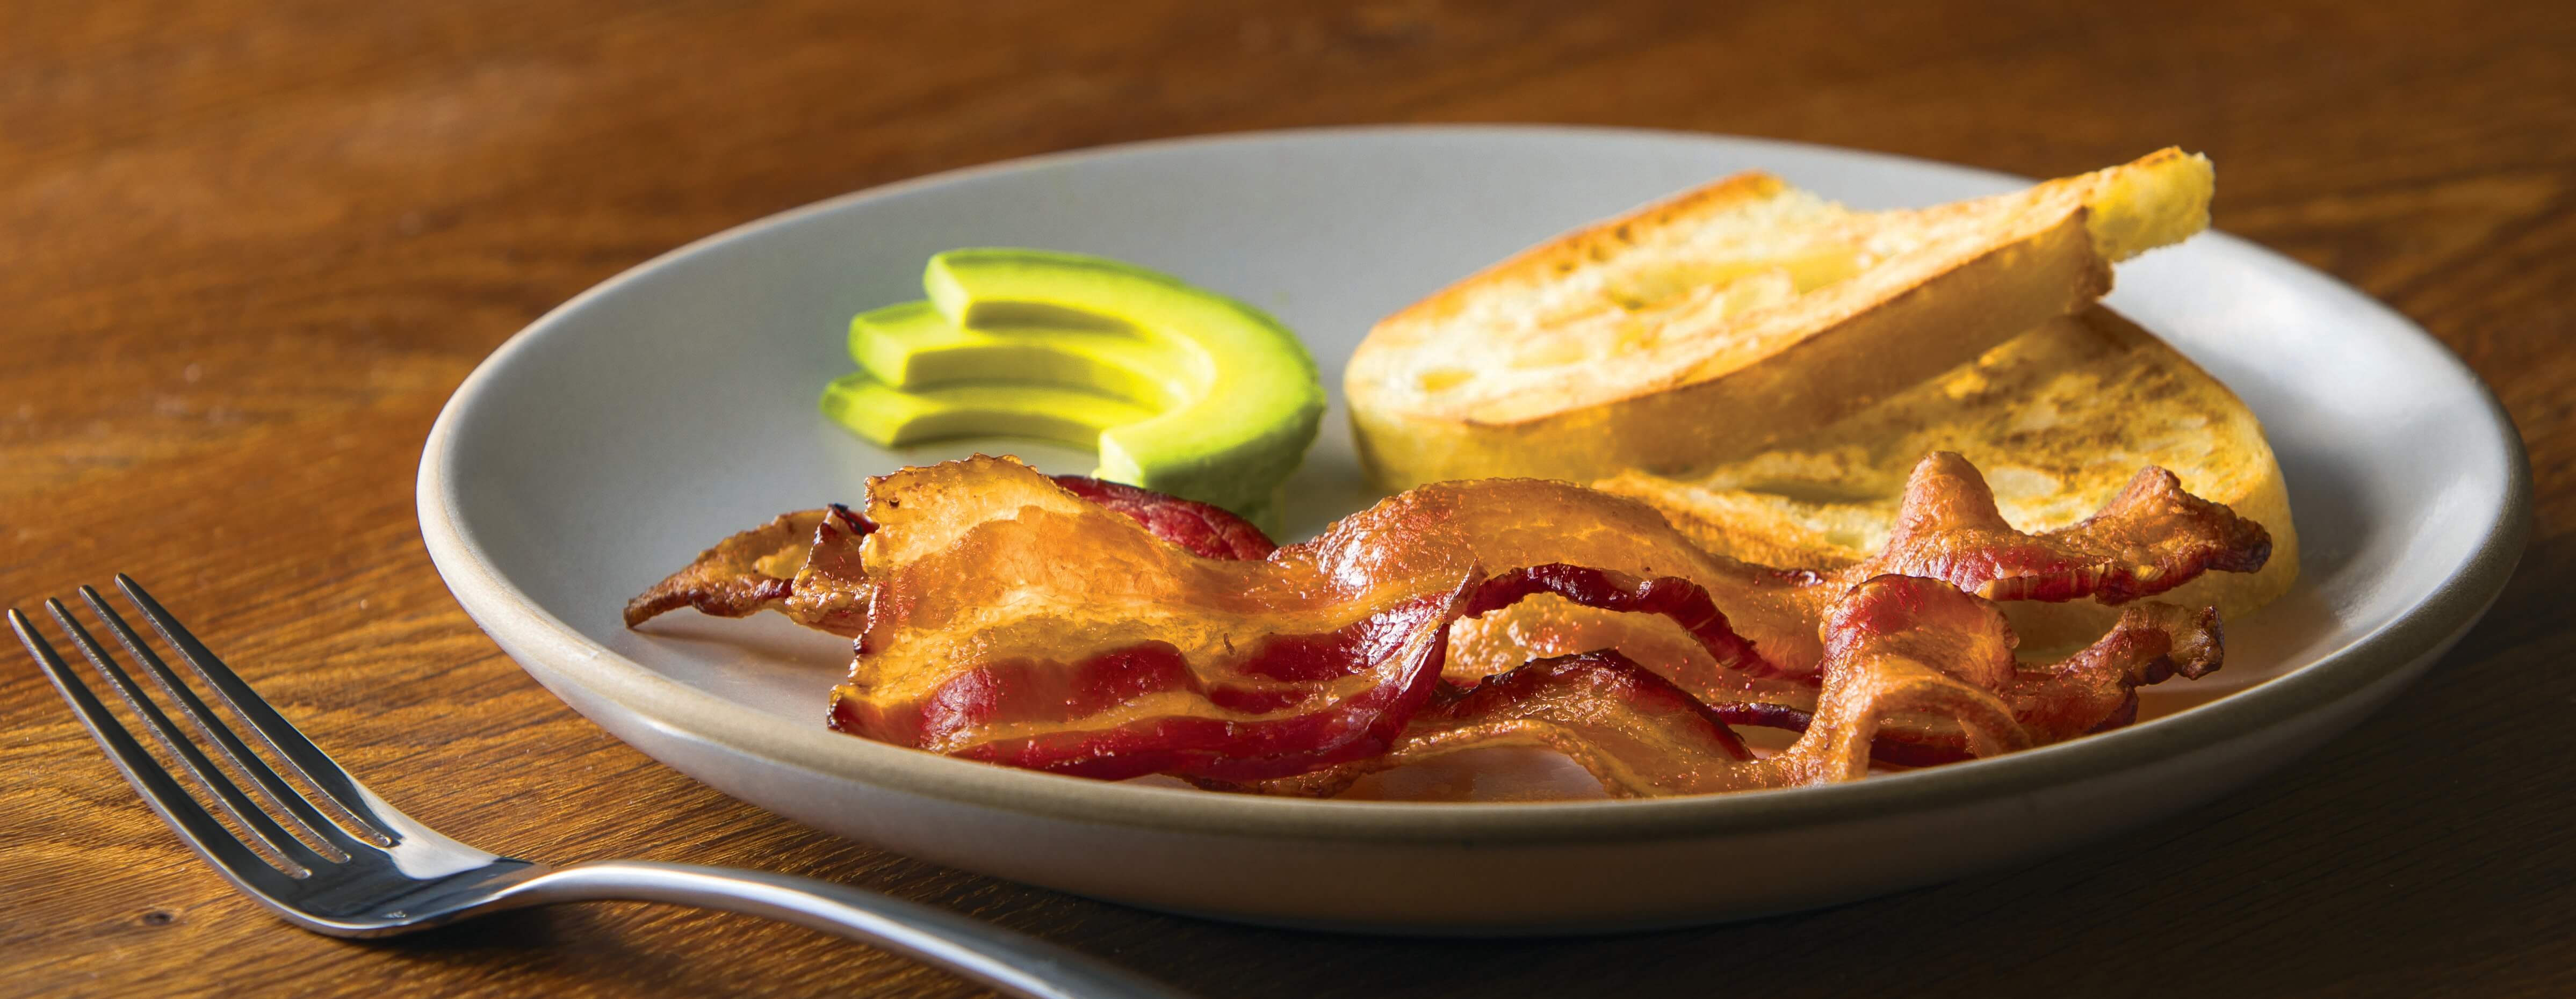 How to Make Delicious Bacon: 5 Best Practices From the Jones Dairy Farm Factory